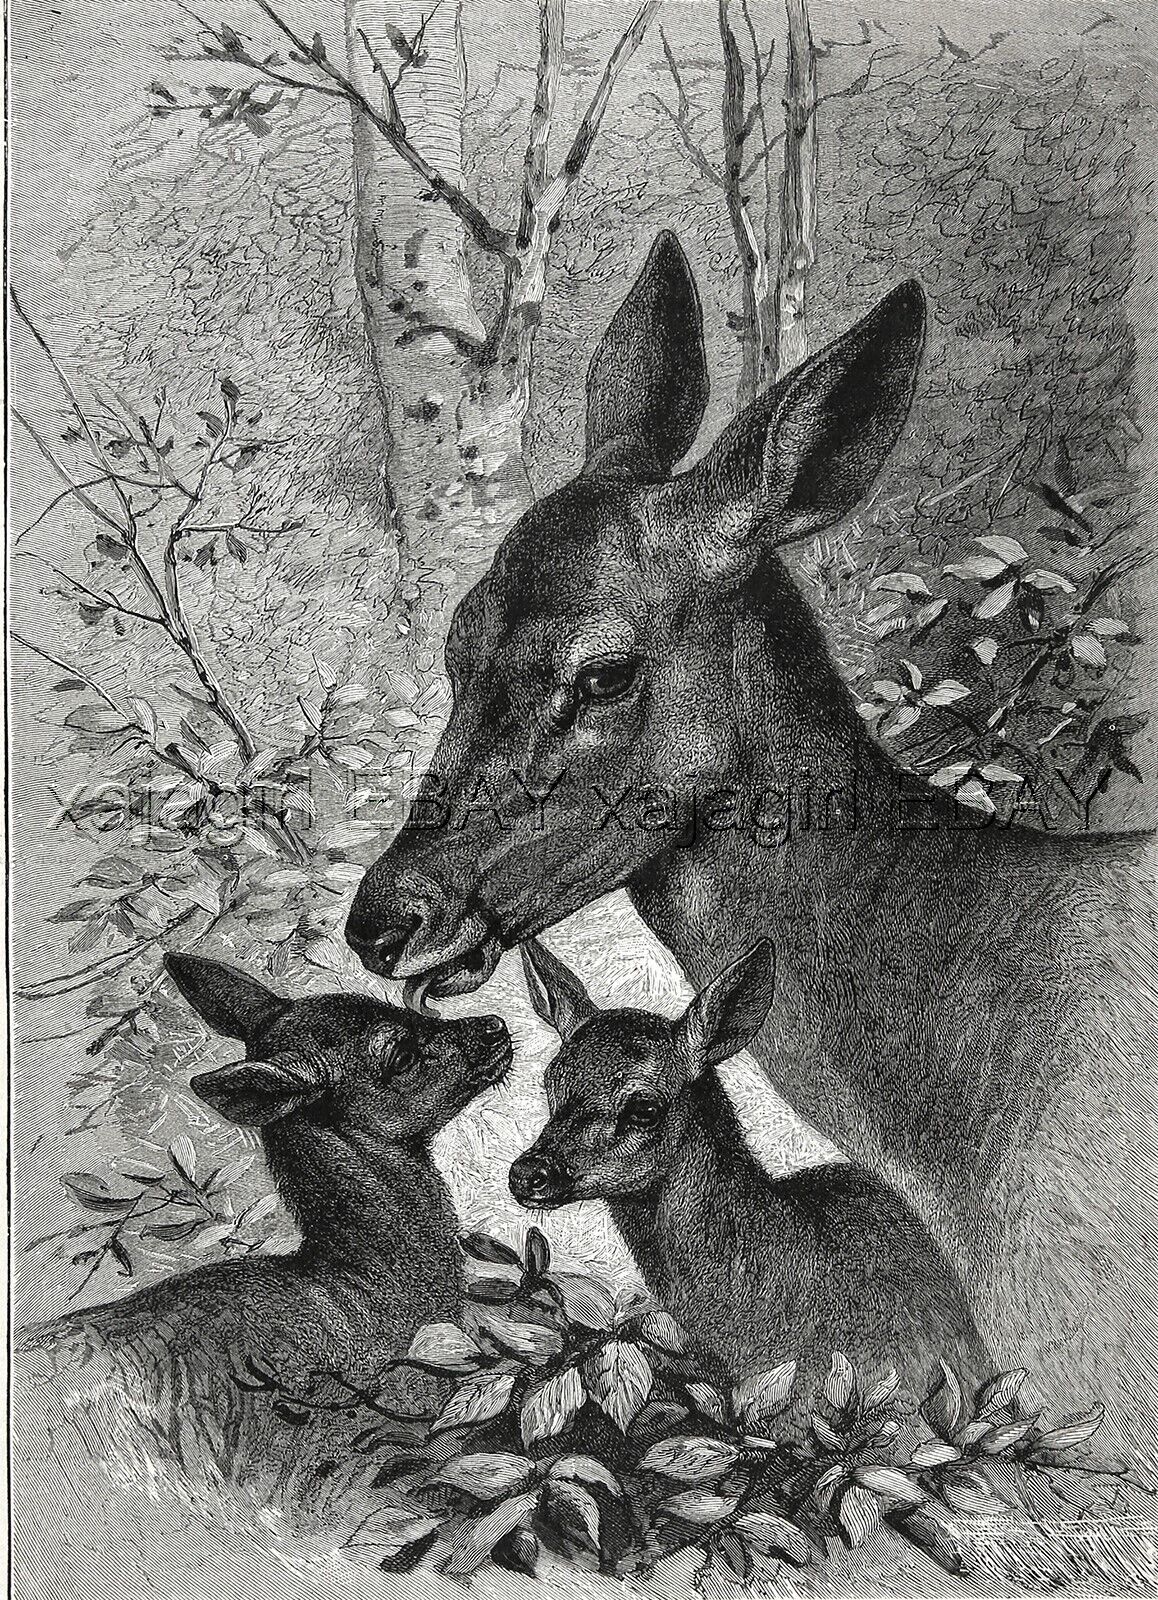 Deer Doe with Twin Fawns, Charming Family Portrait, Large 1880s Antique Print